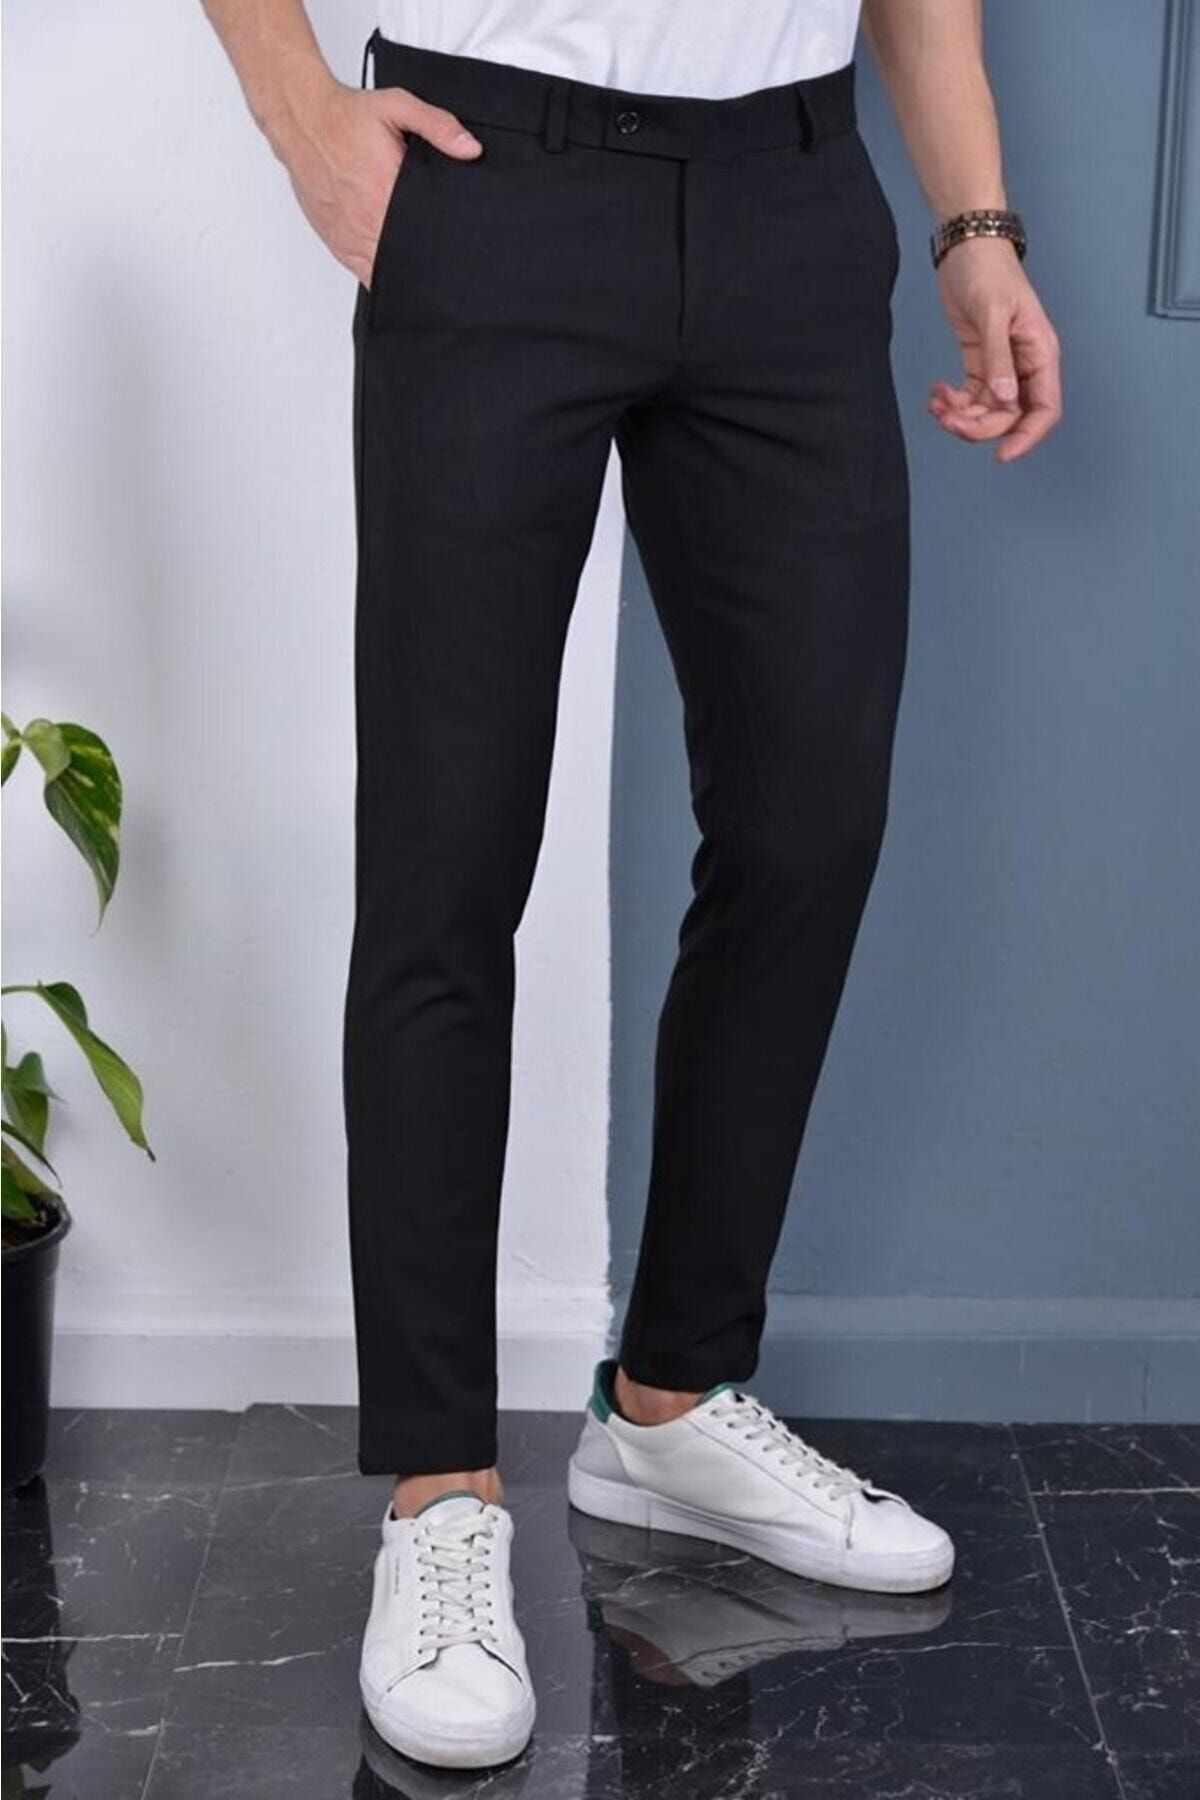 Buy Sapphire formal Pant For Men Black at Amazon.in